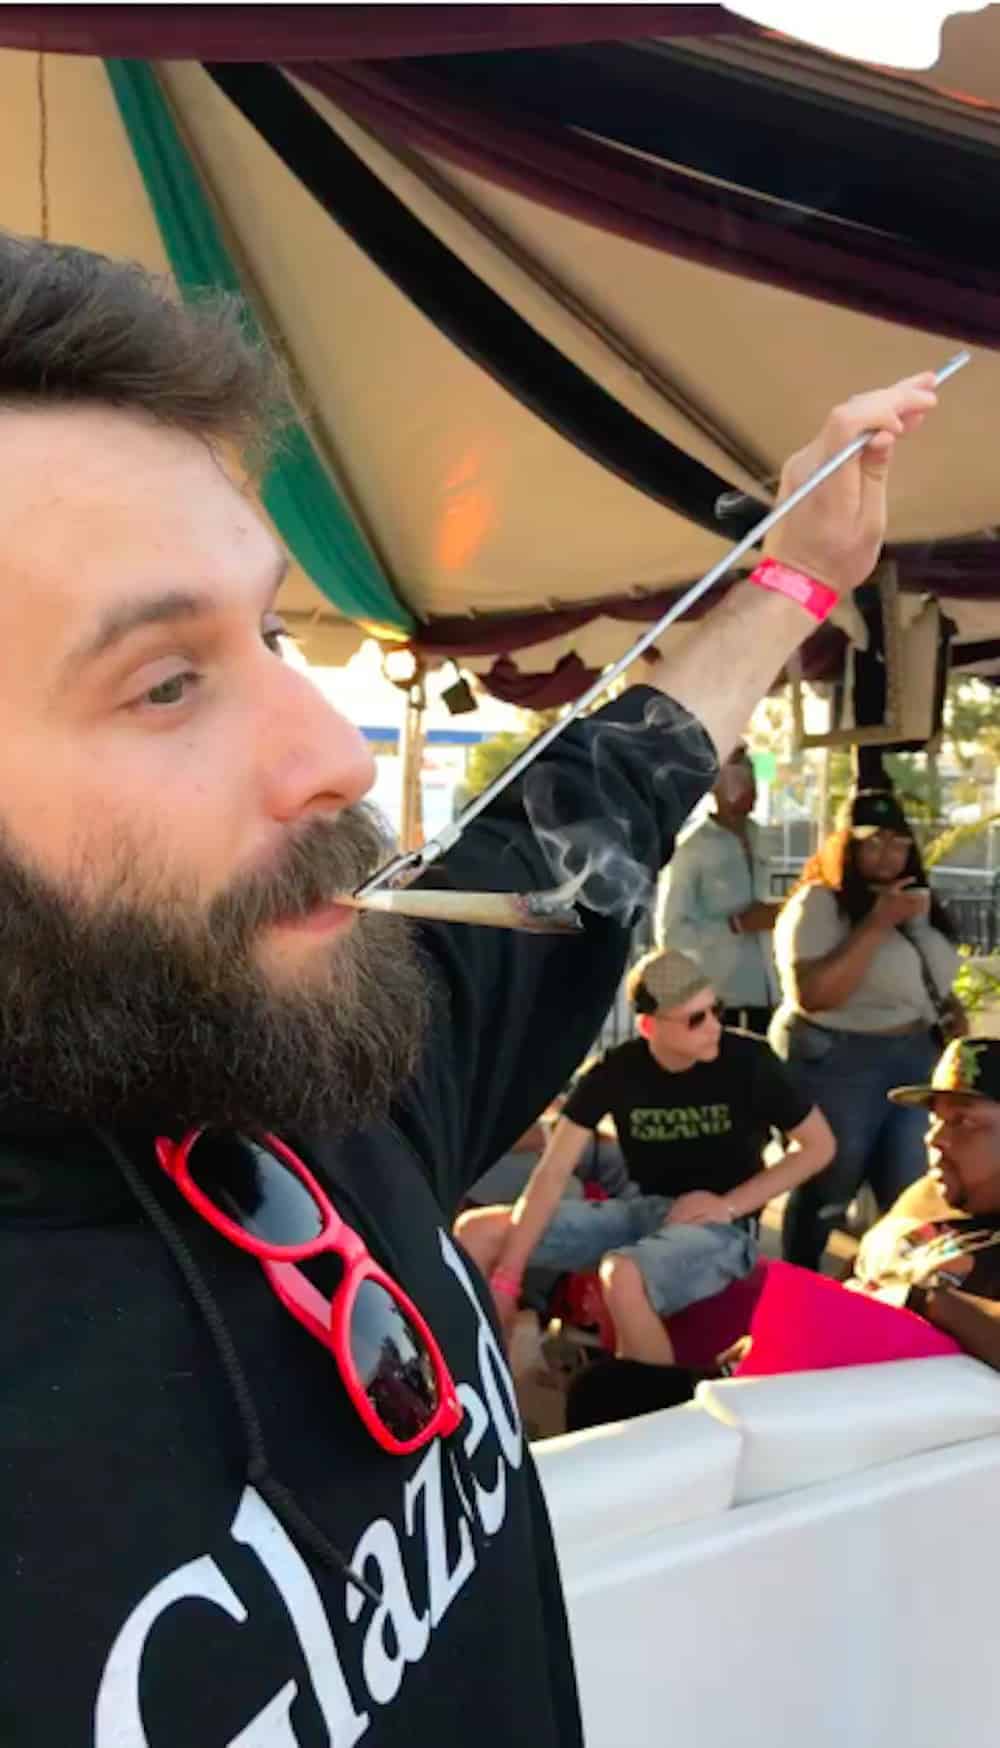 The 15 Dankest I Saw At The Cannabis Cup